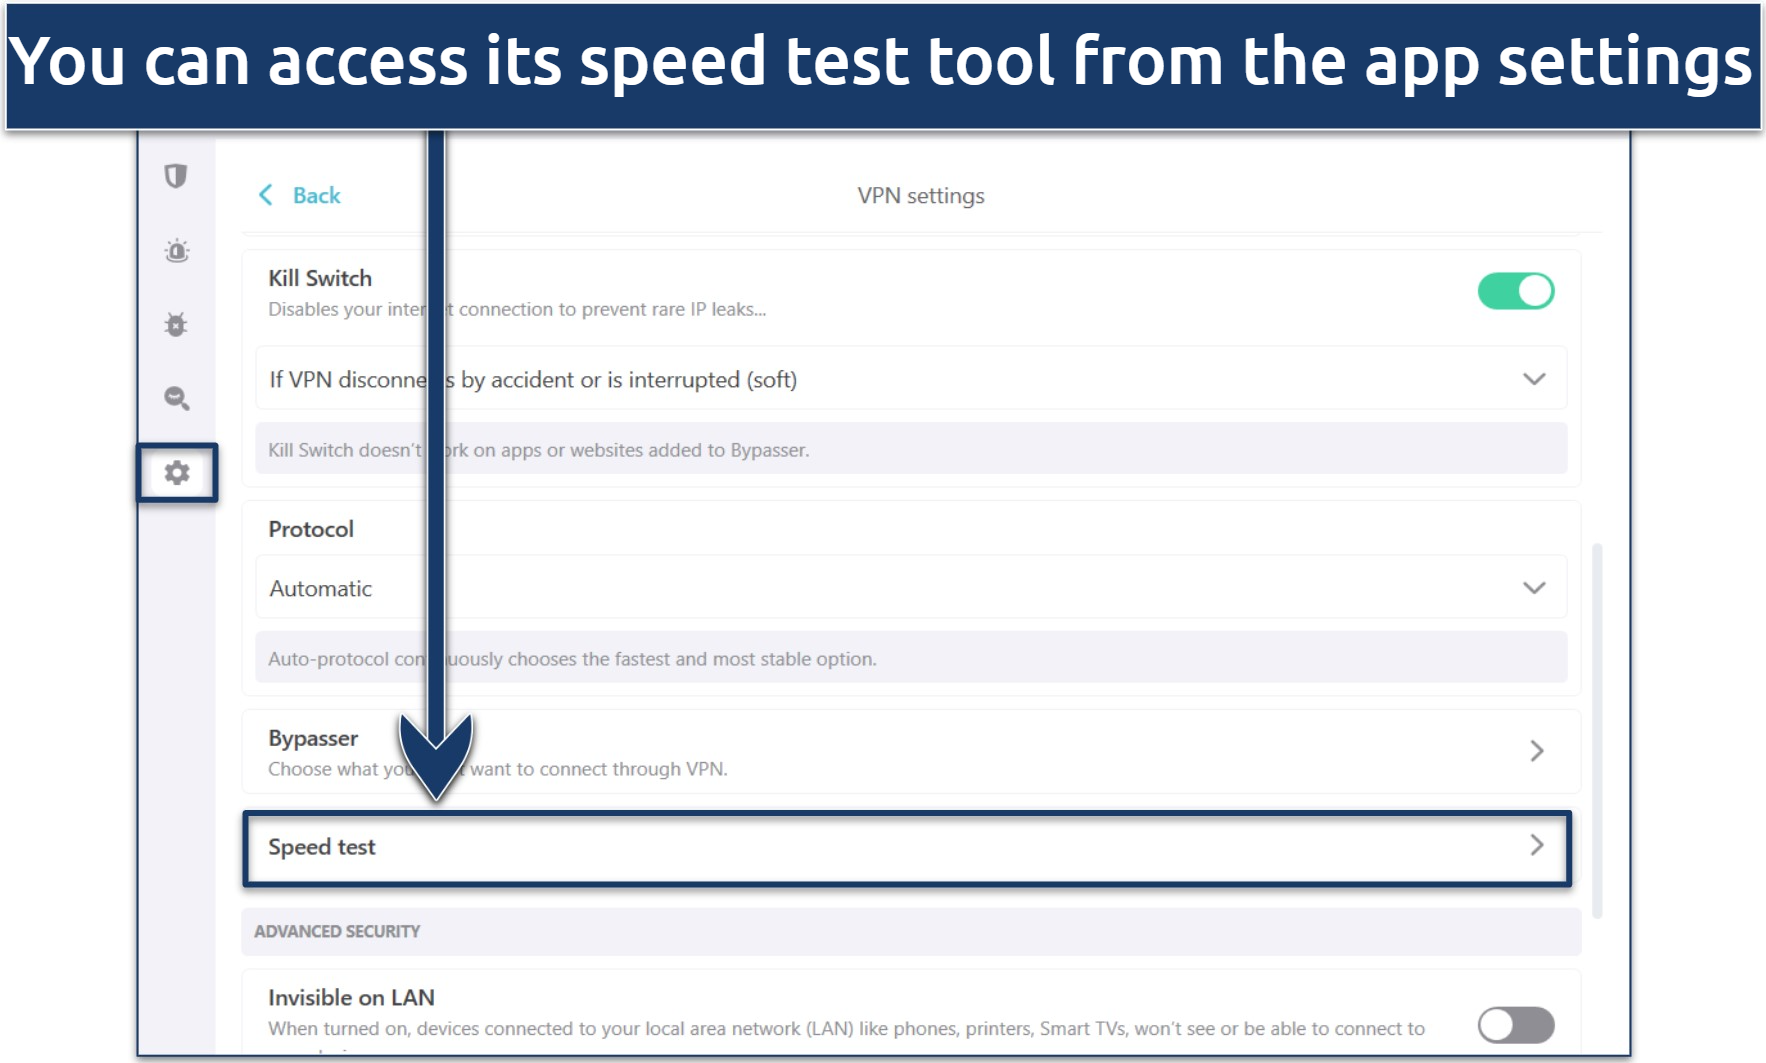 Screenshot showing how to access Surfshark's speed test tool